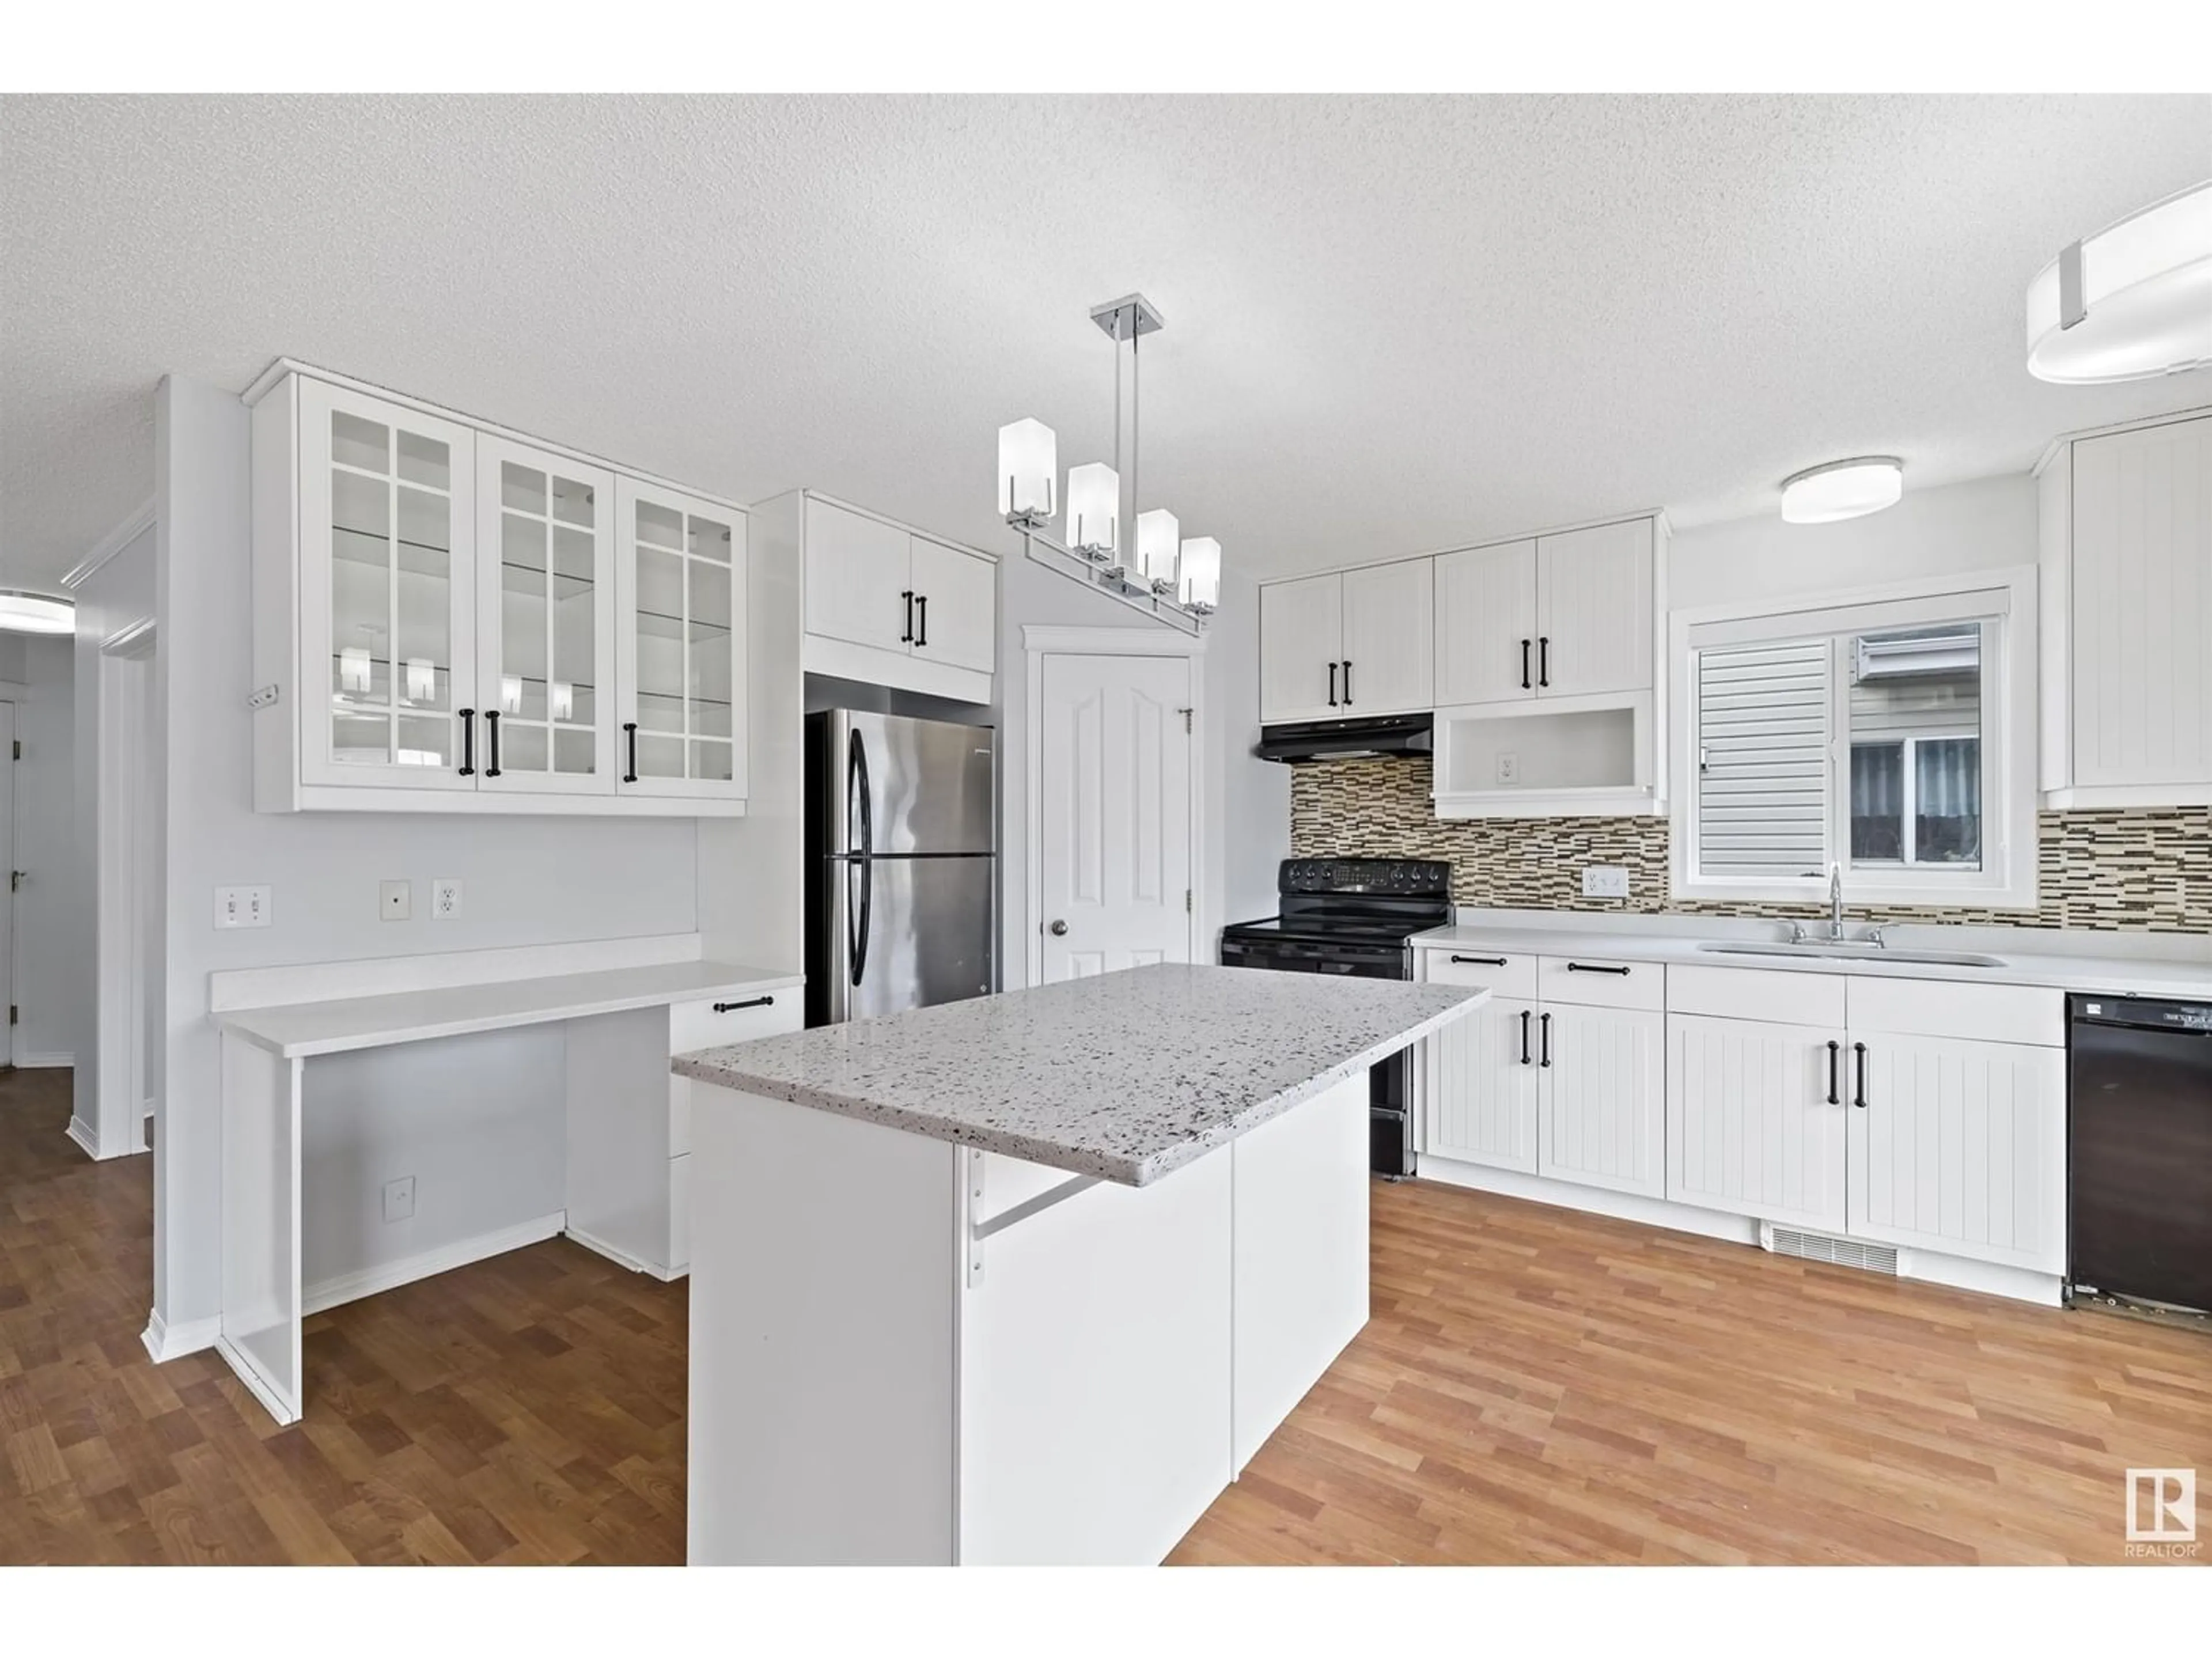 Kitchen for 4039 31 ST NW NW, Edmonton Alberta T6T1L3